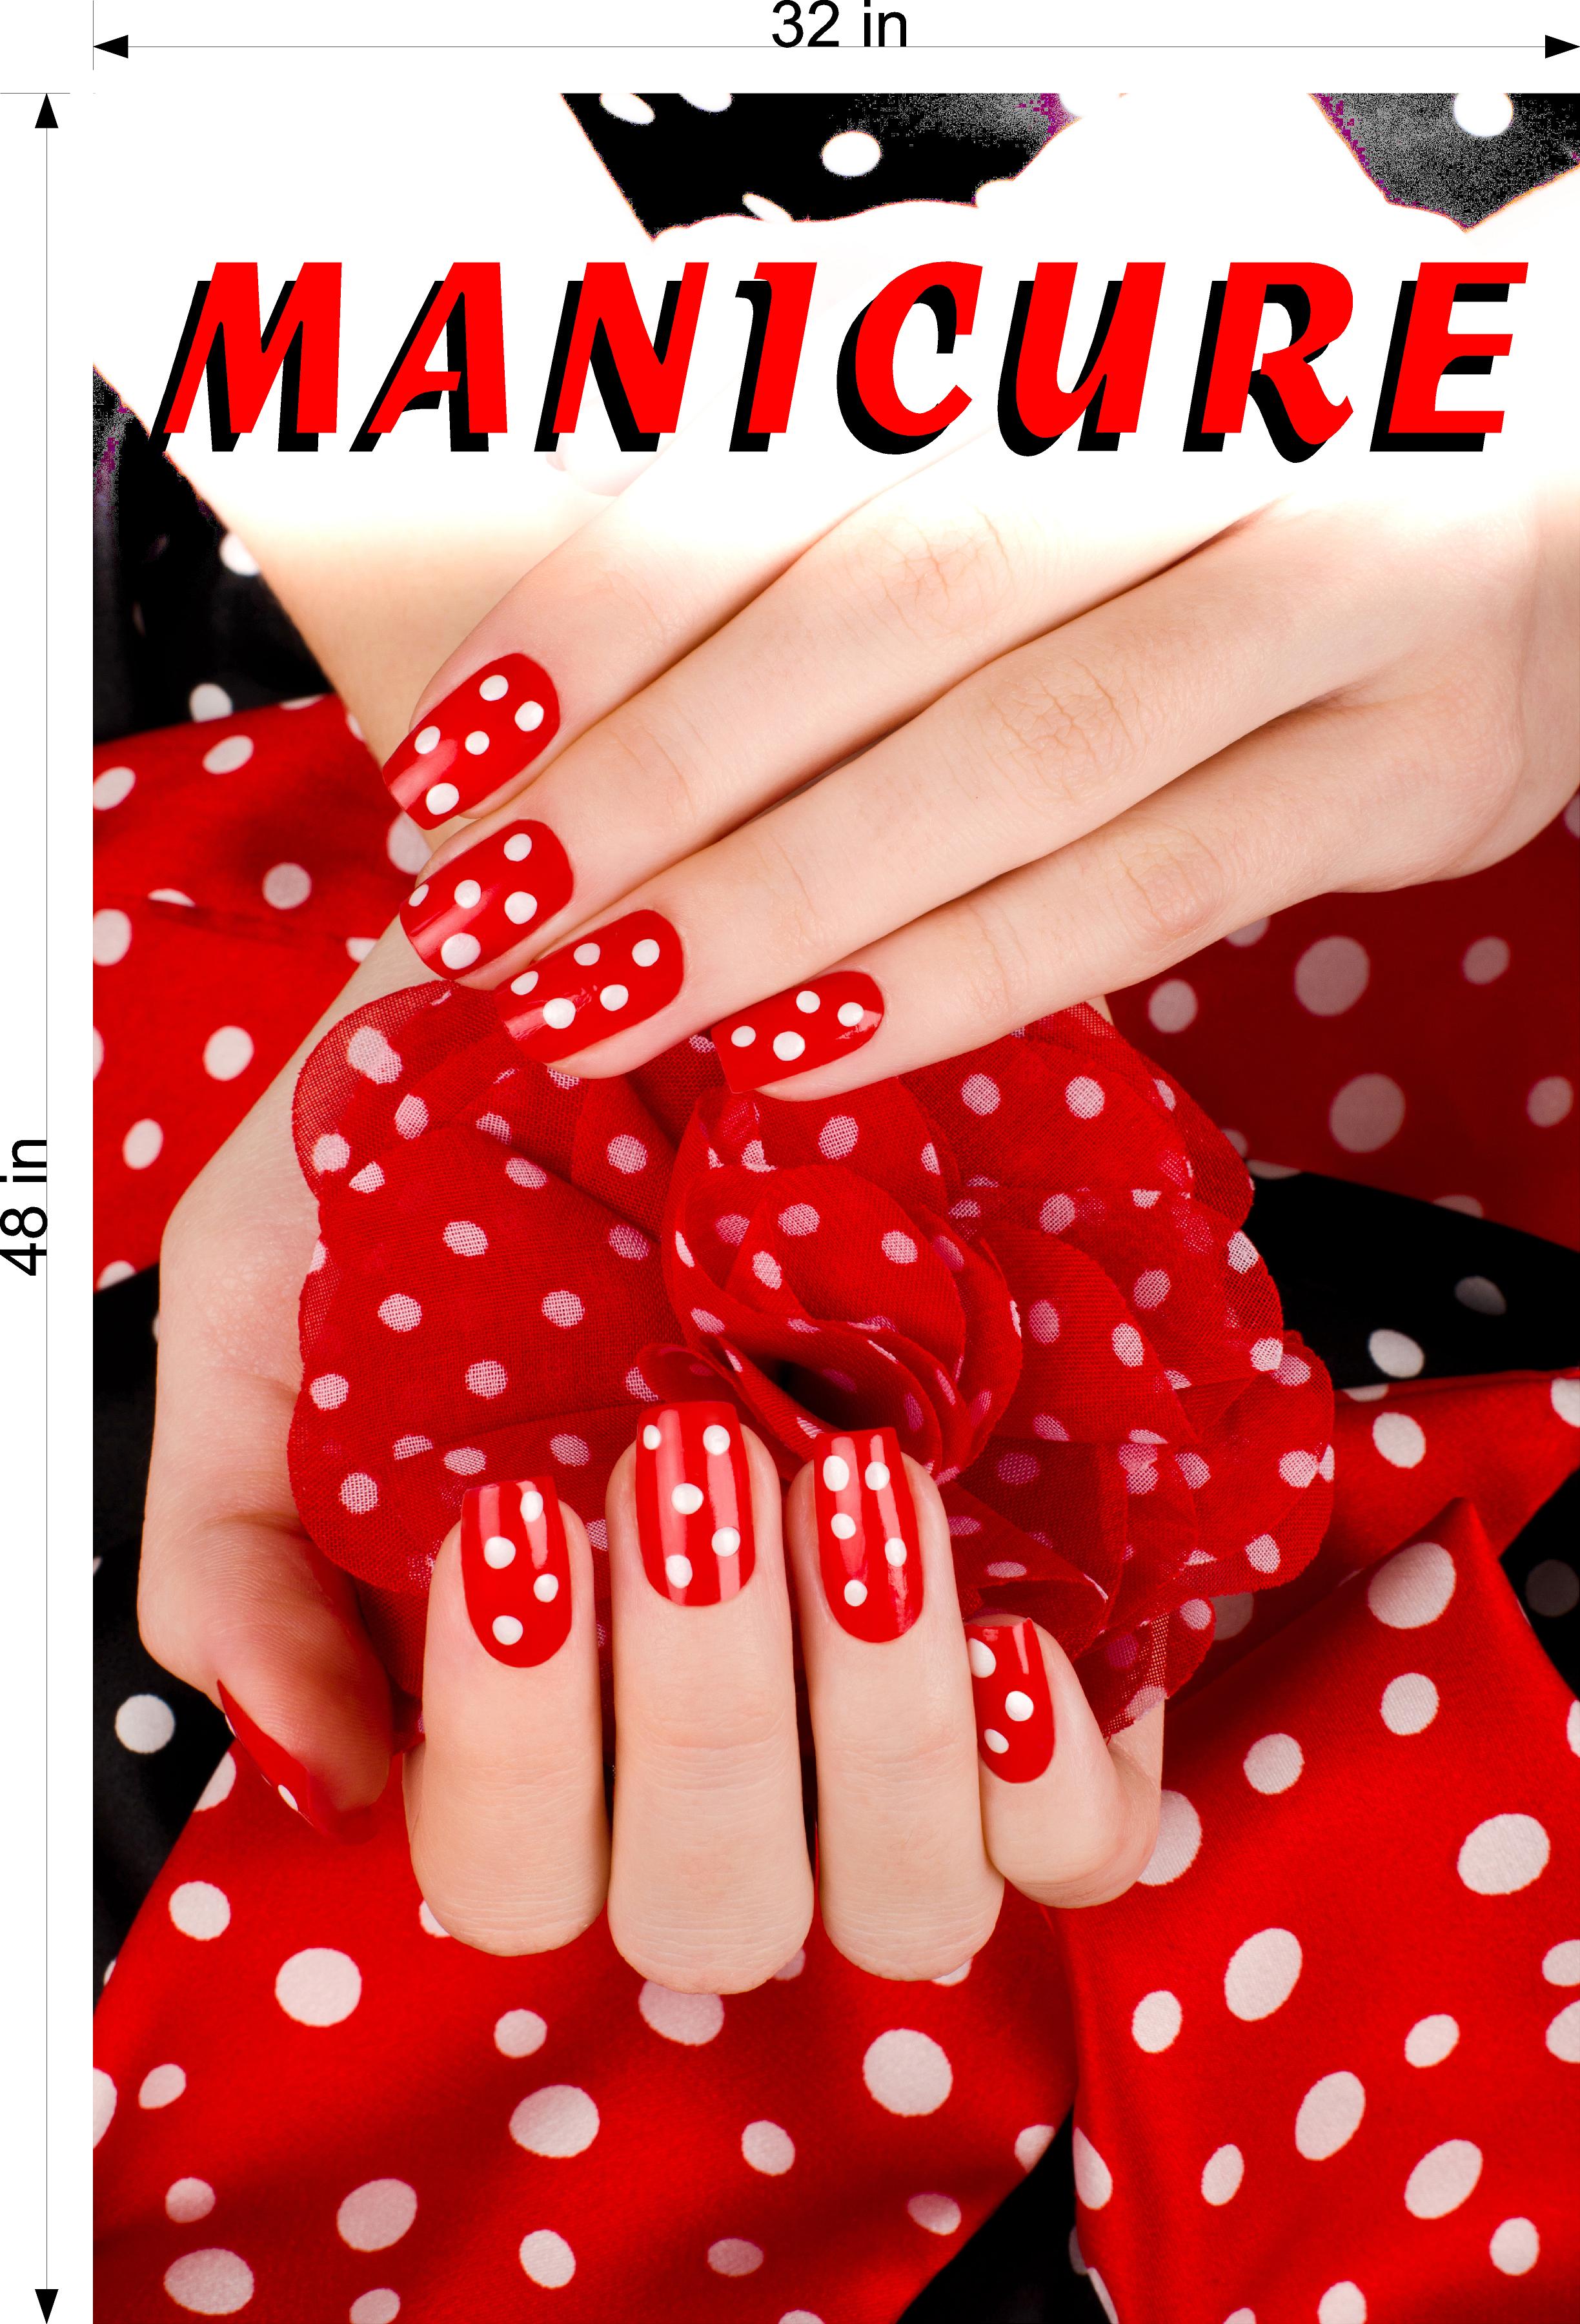 Manicure 15 Perforated Mesh One Way Vision See-Through Window Vinyl Nail Salon Sign Vertical